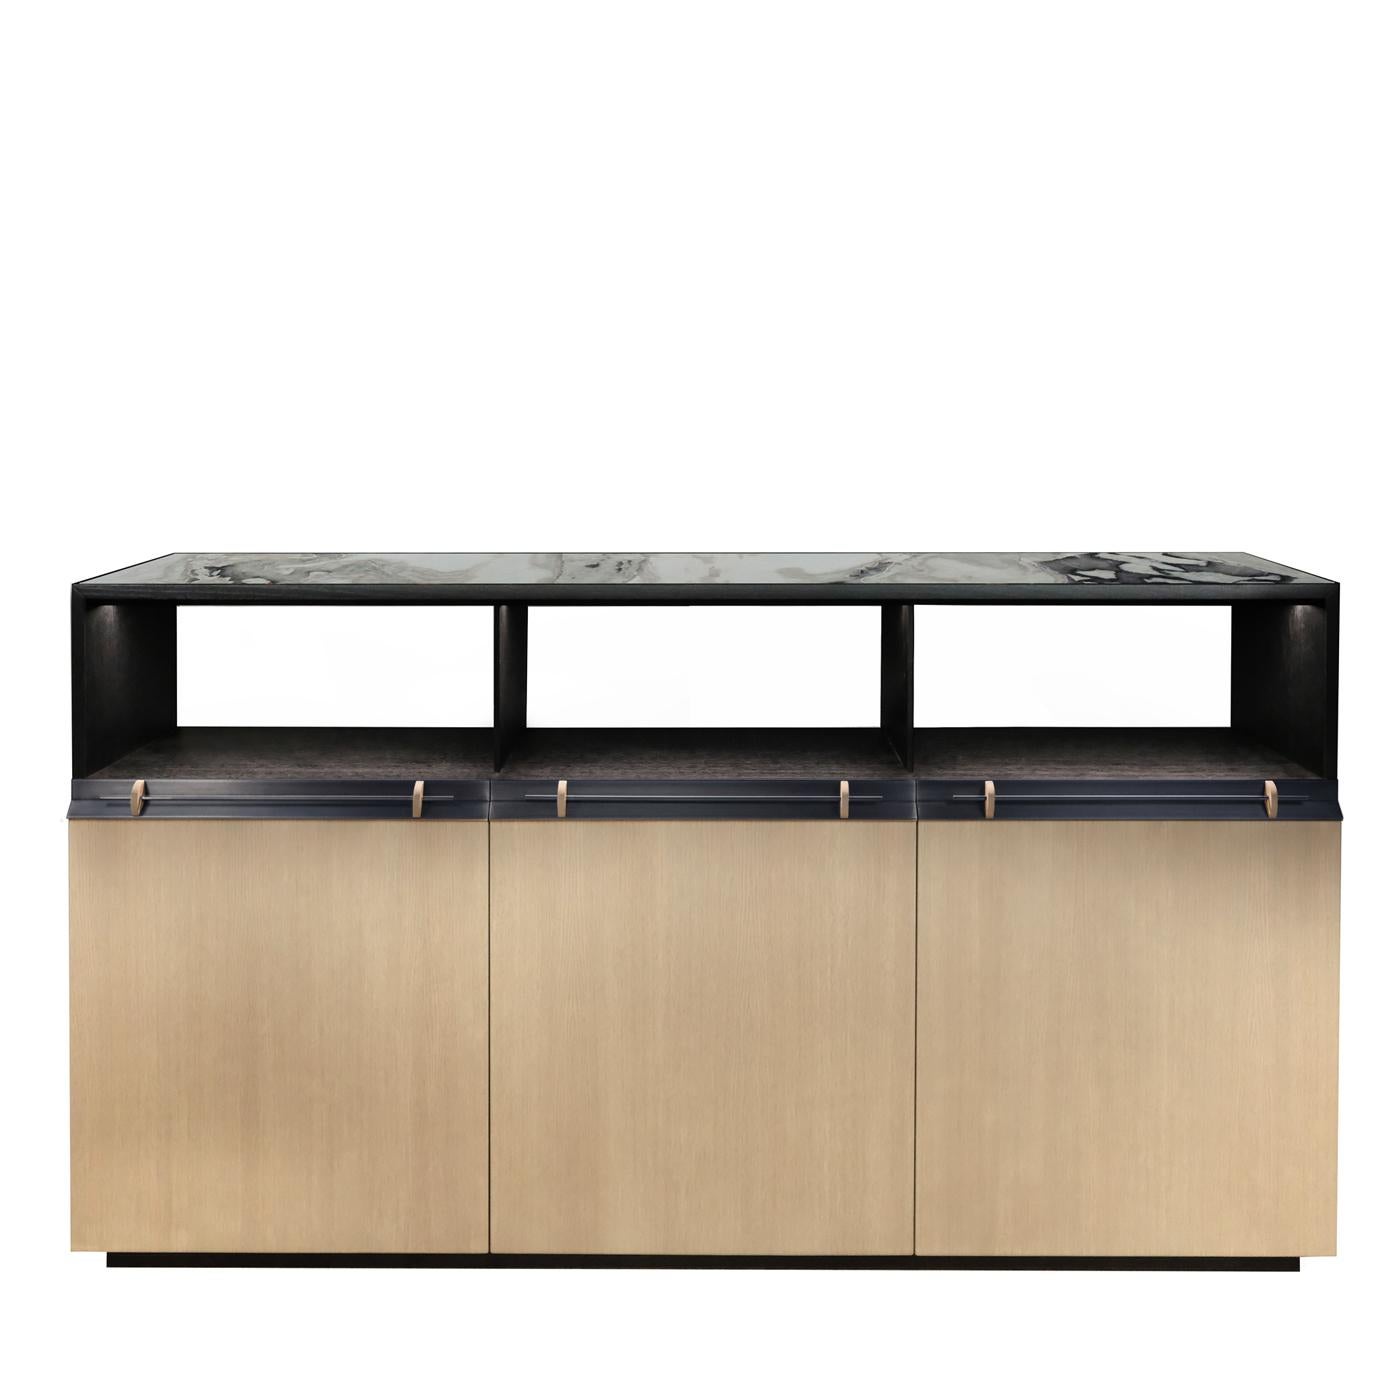 This sideboard is a versatile and eclectic piece of functional decor, combining refined materials and delicate finishes. Crafted of oak with a matte stained beige finish, it features three doors and corresponding upper open storage in black. The